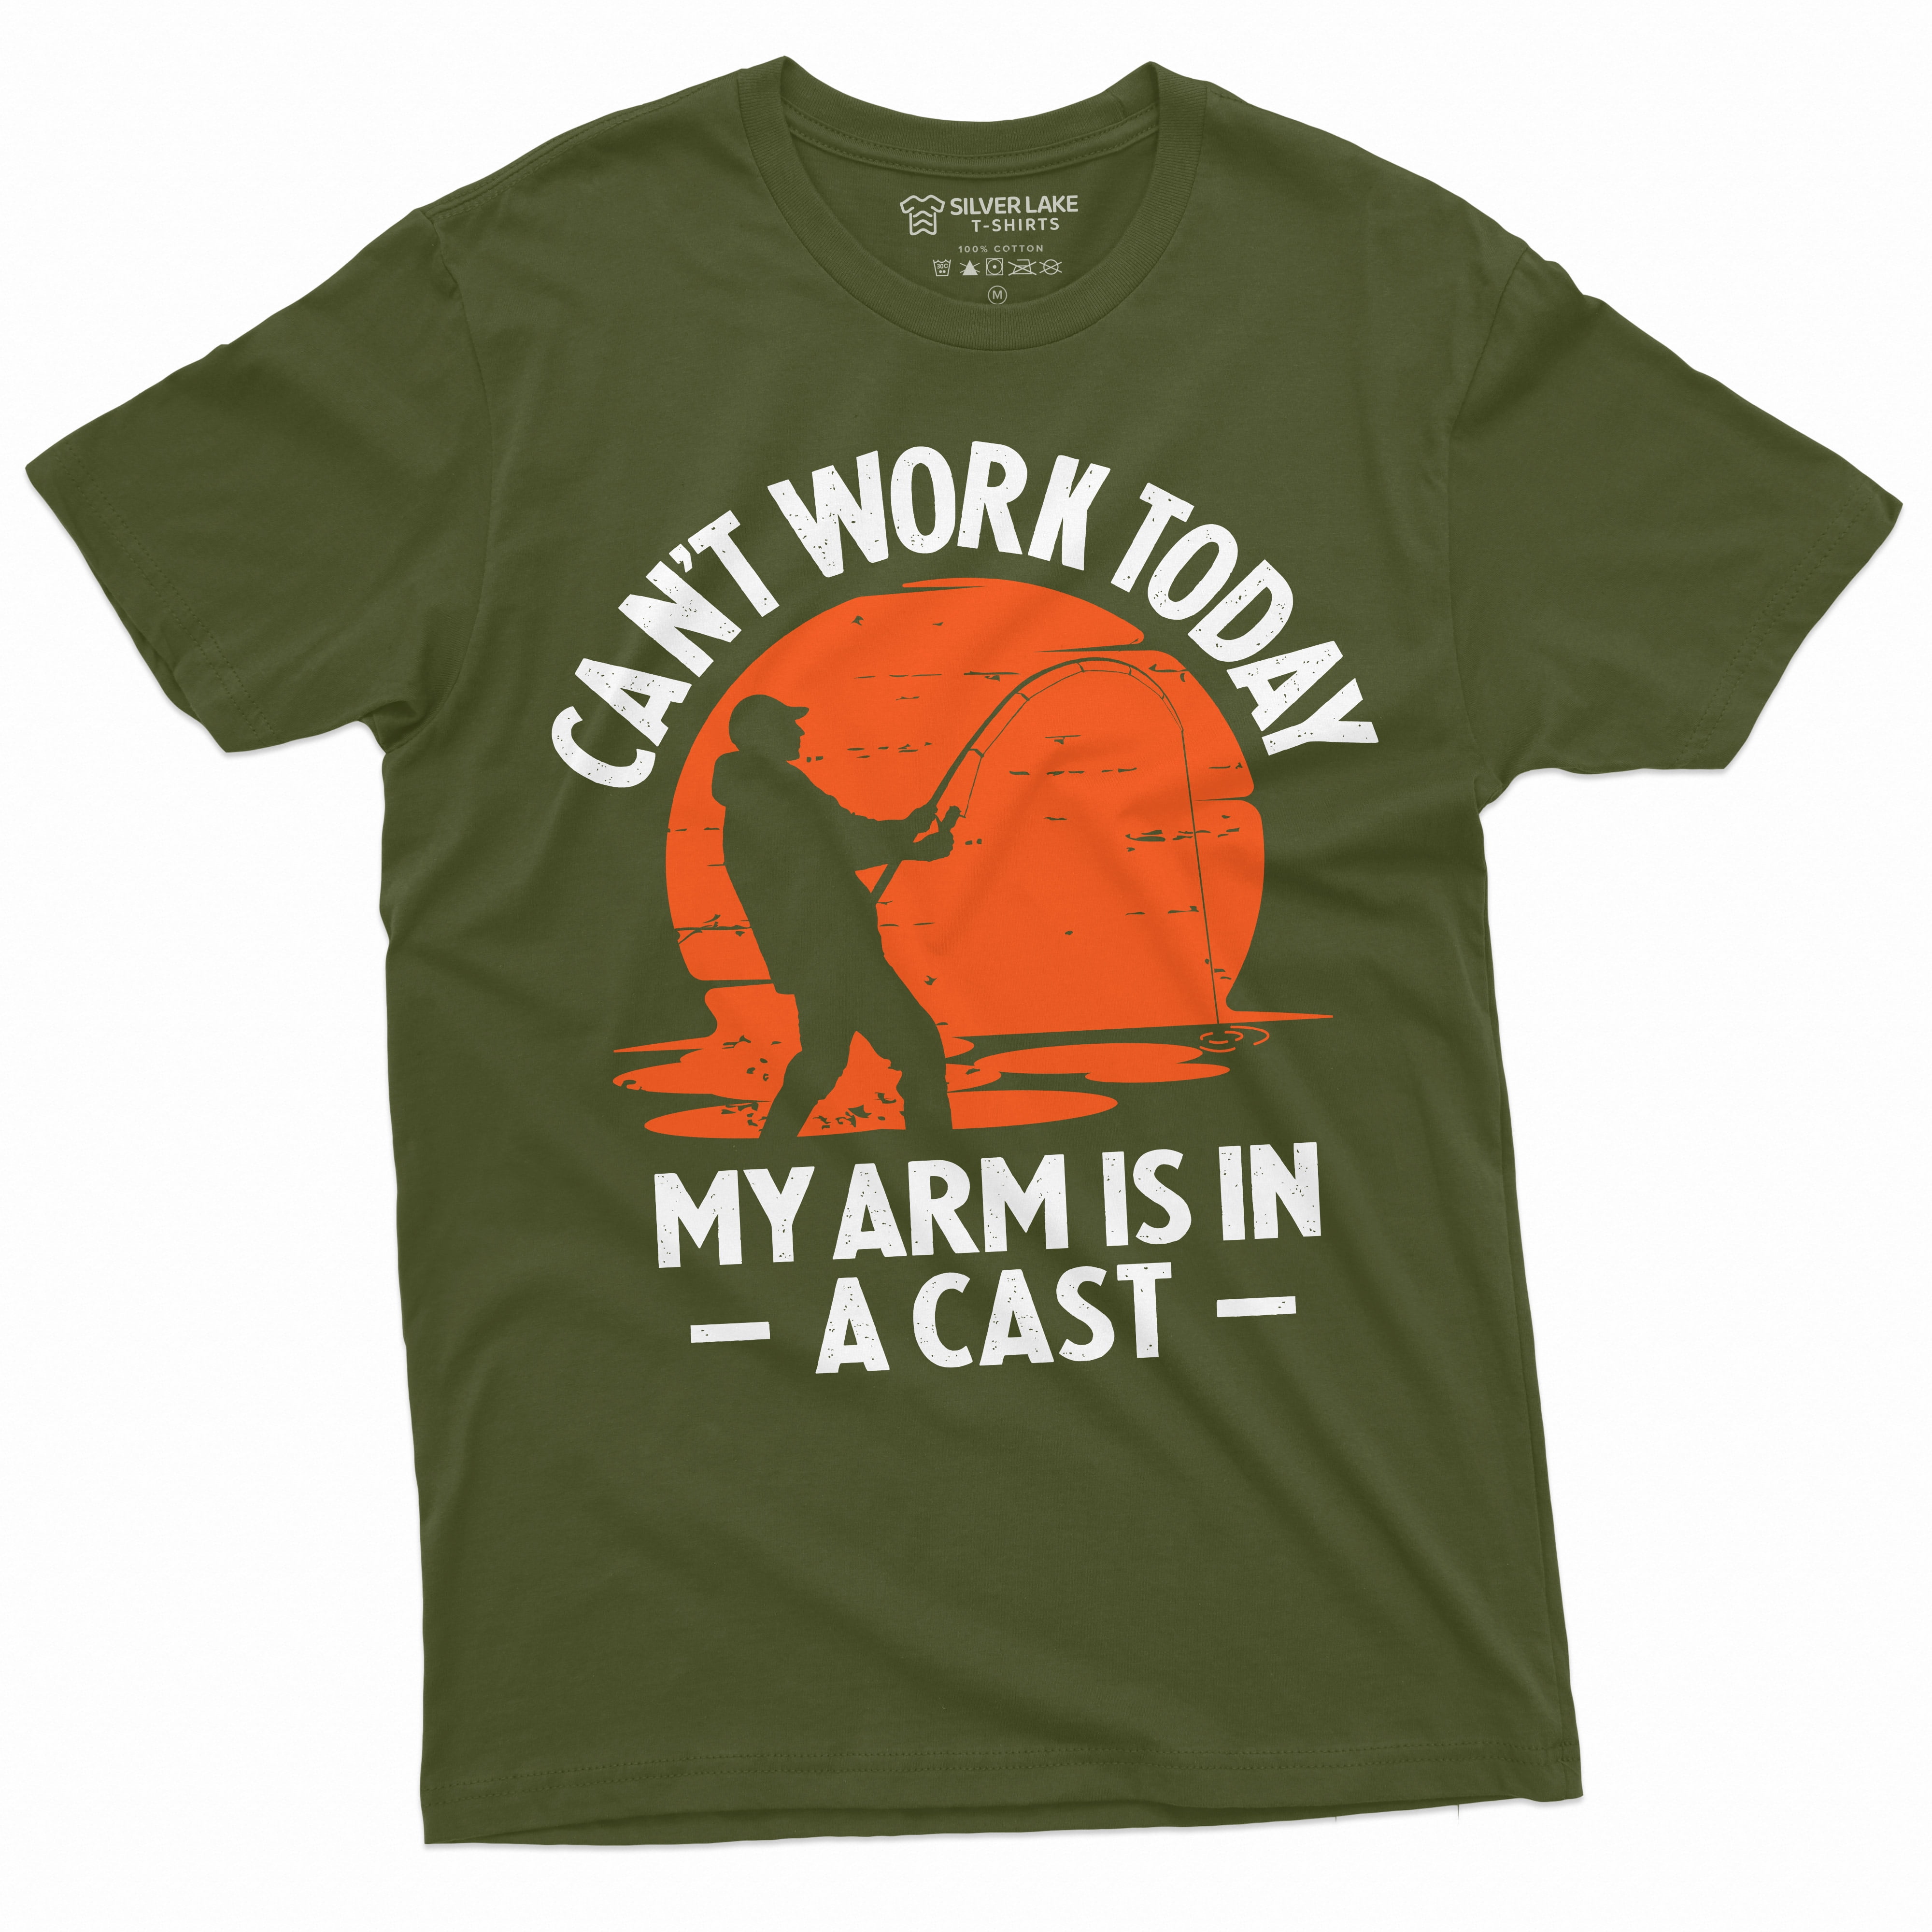 Men'S Funny Fishing T-Shirt Can'T Work Today My Arm Is In A Cast Novelty  Tee Shirt (Medium Military Green) 